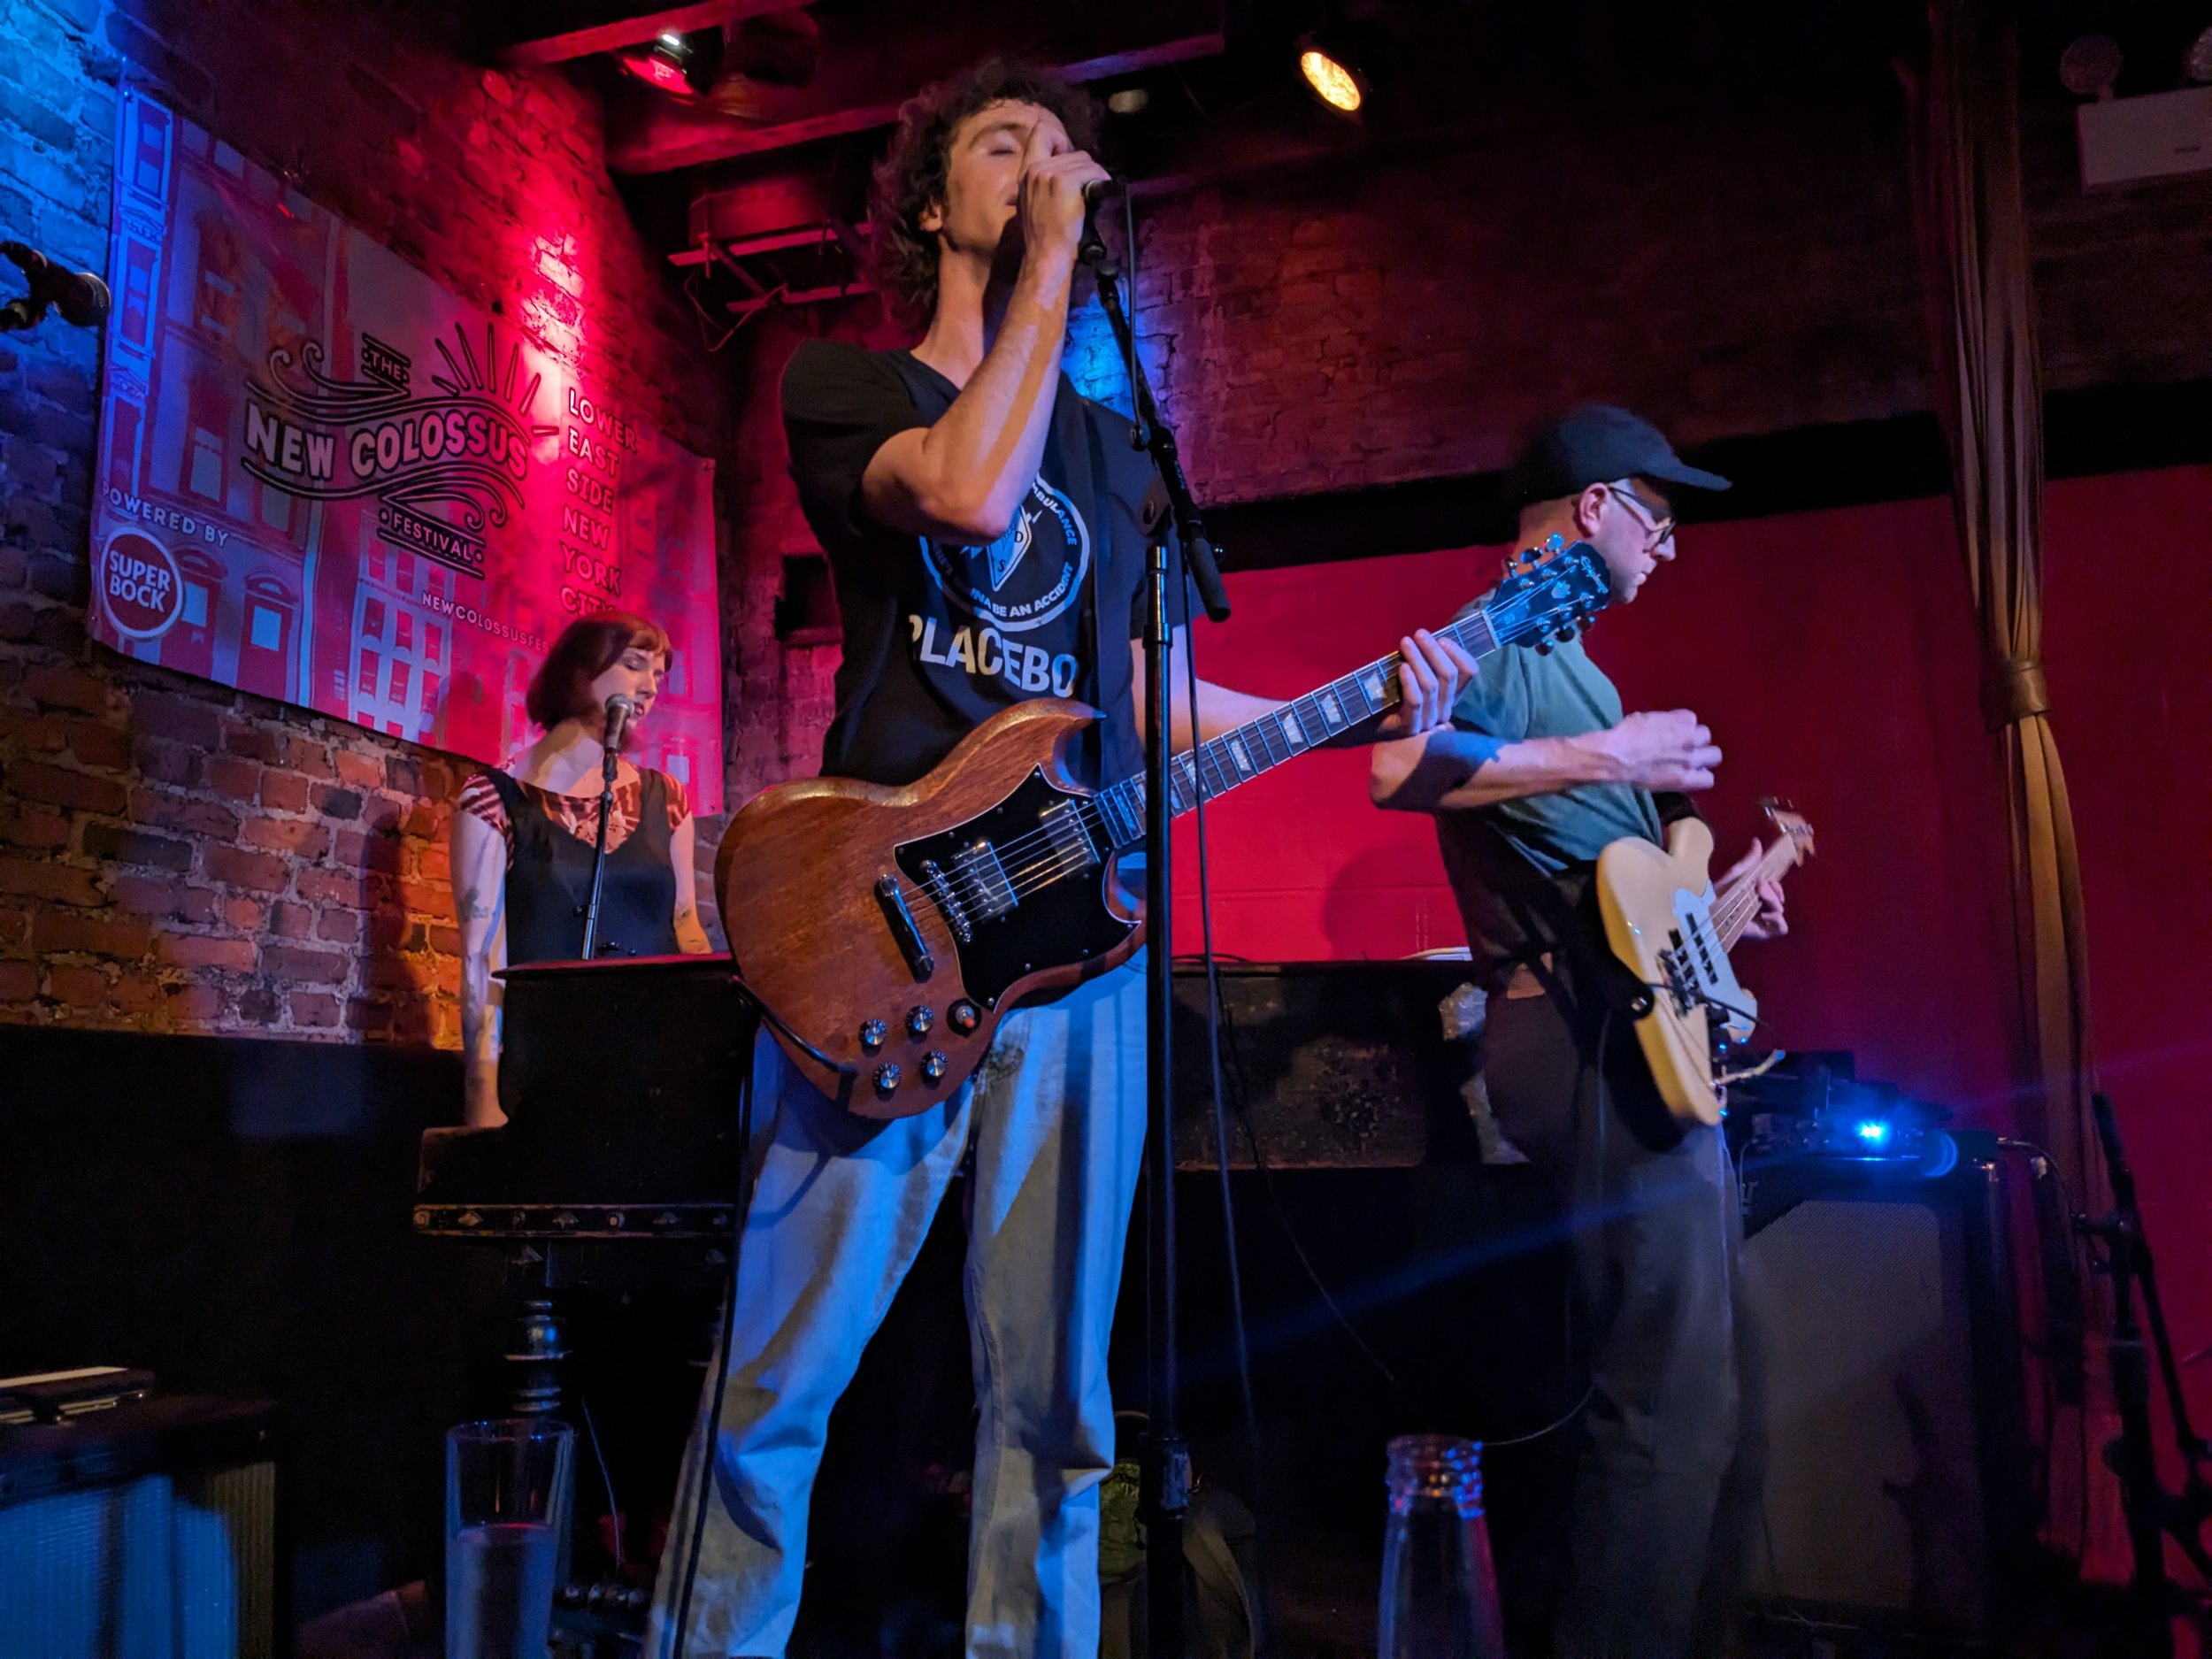 240307-live-review-fest-new-colossus-rockwood-kee.jpg